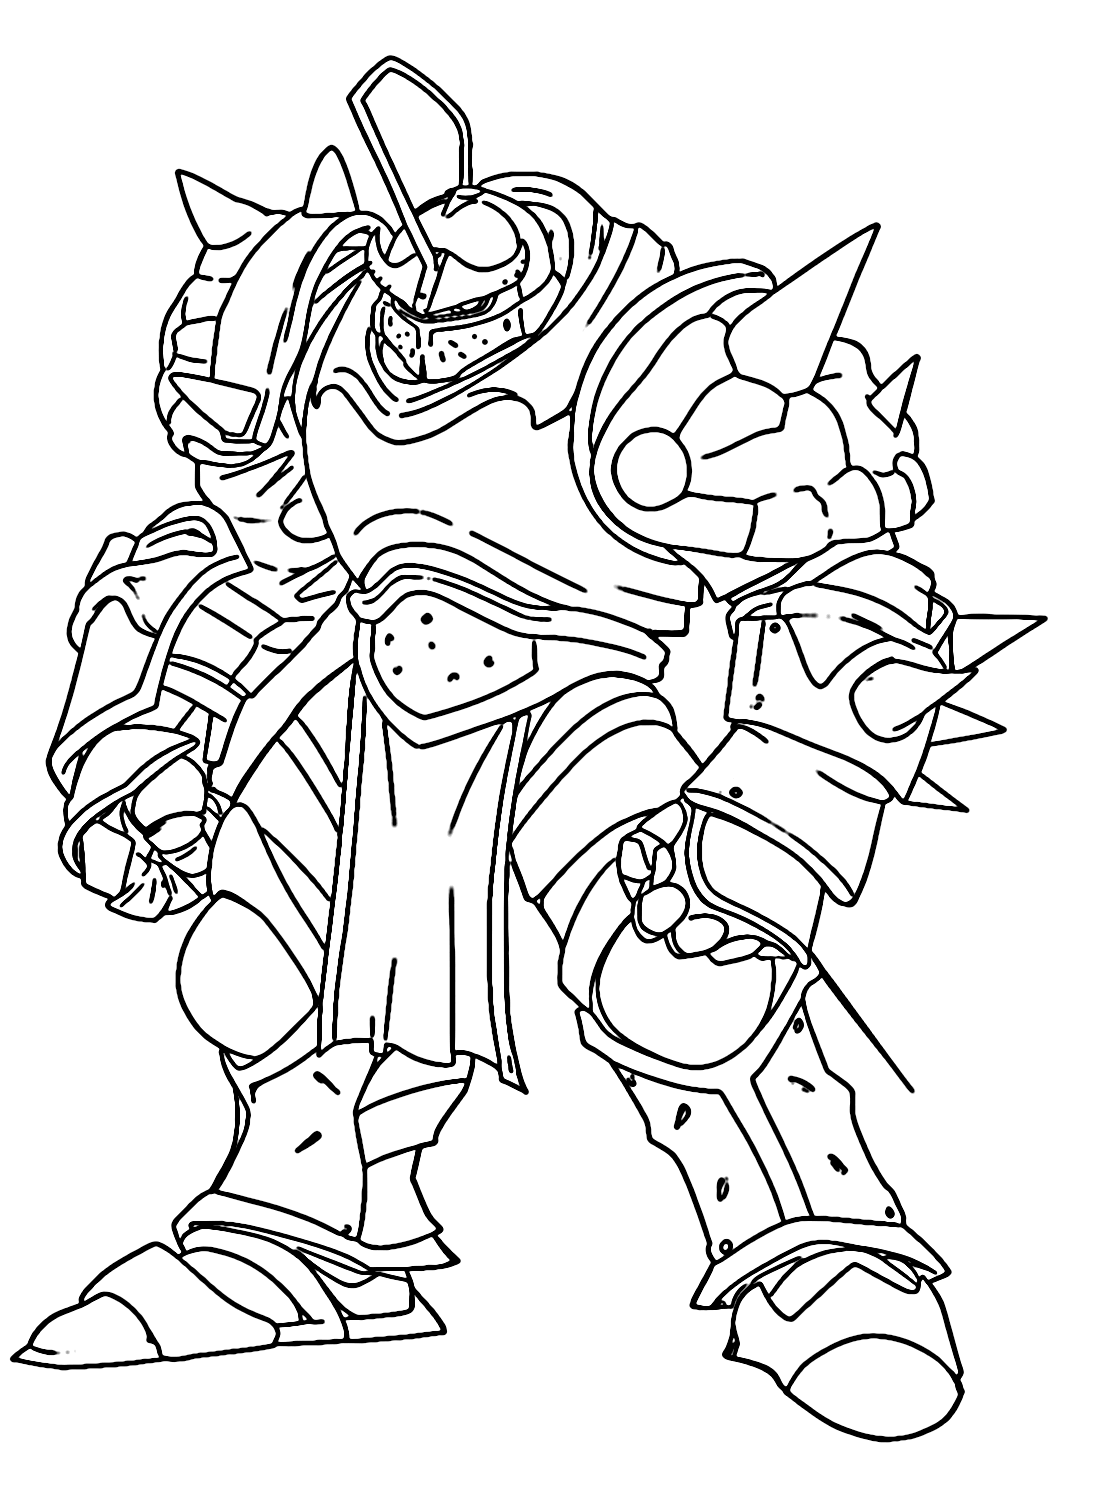 Alphonse Elric to Color from Alphonse Elric